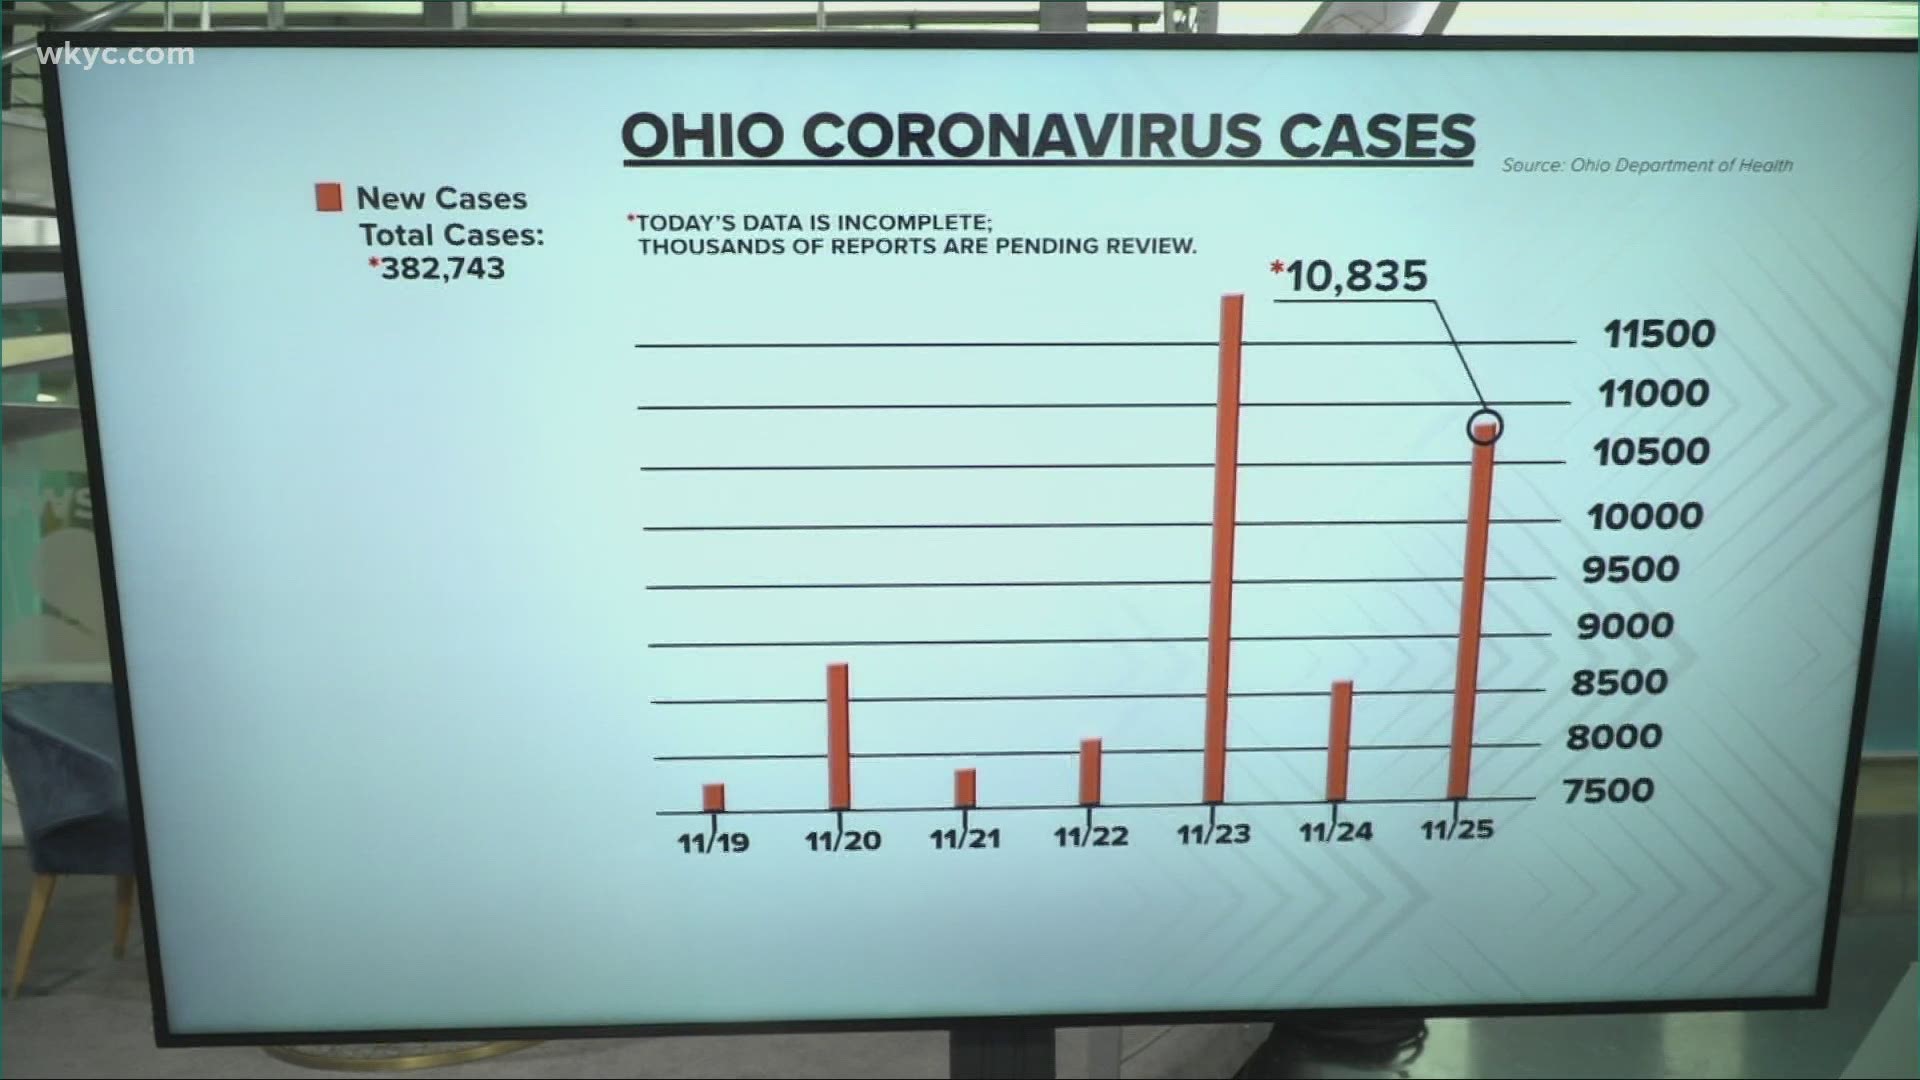 The state is once again over 10,000 new cases in 24 hours. Ohio also reported 156 new deaths.